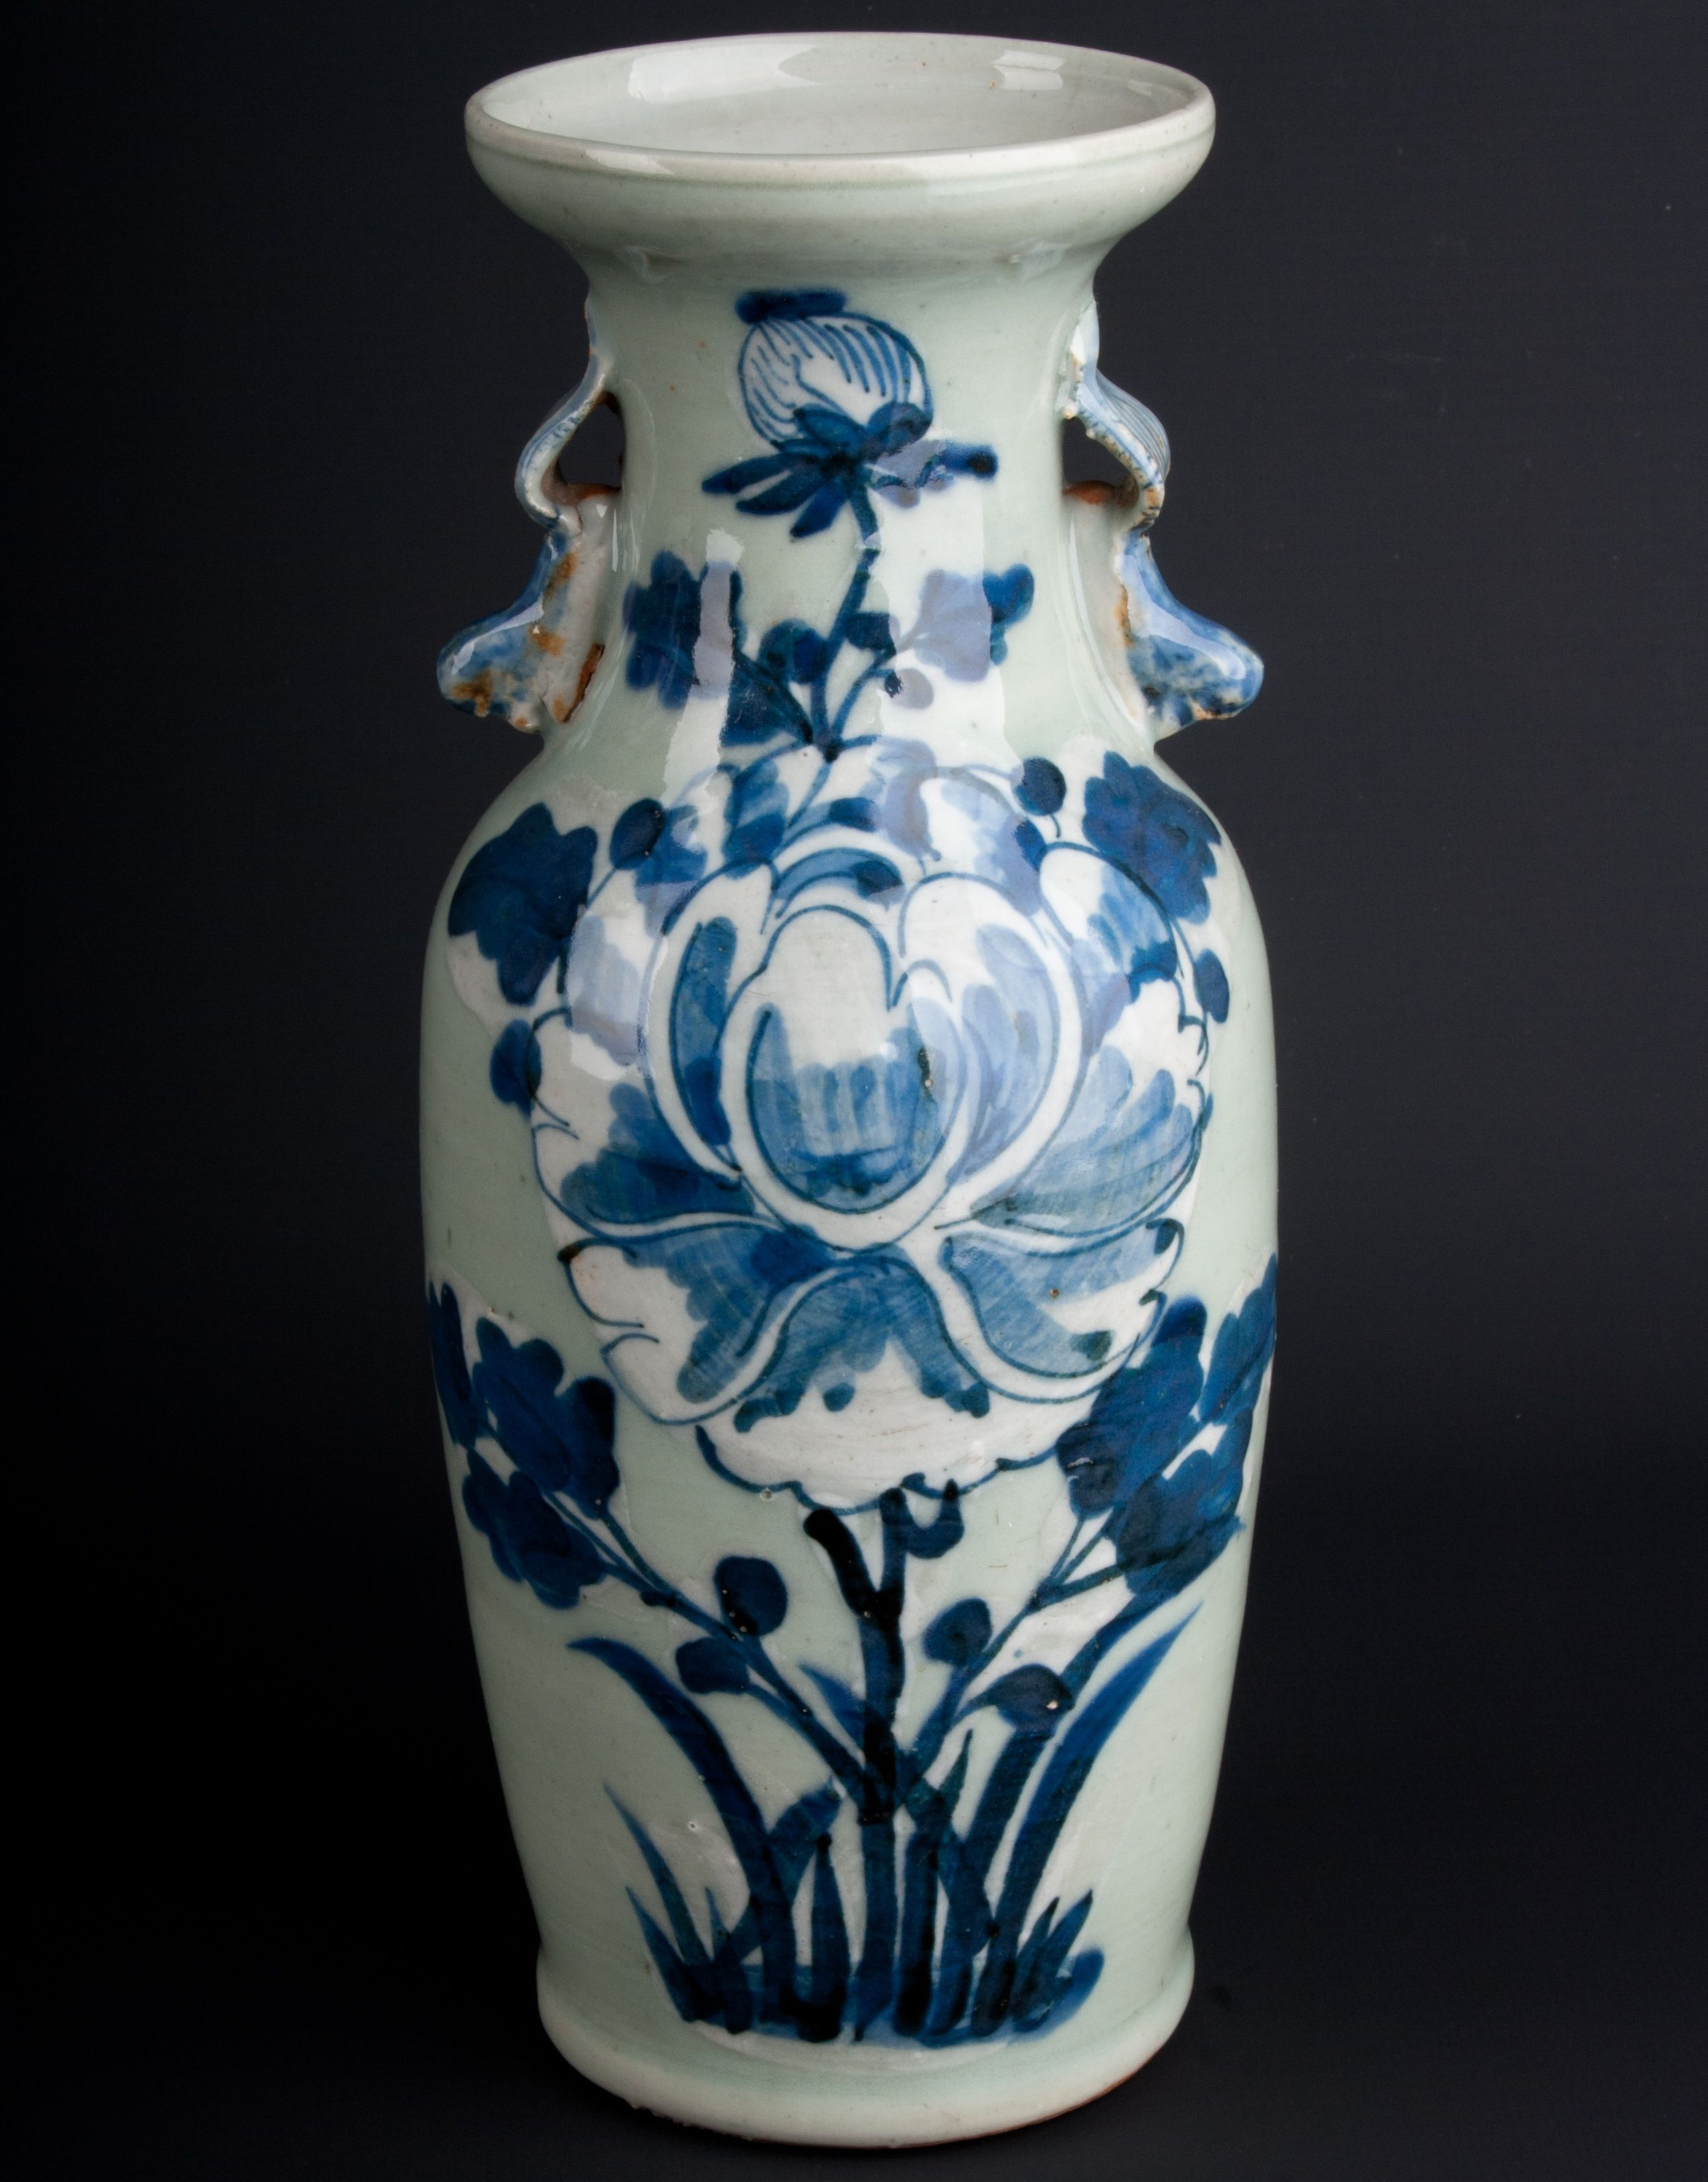 Oriental Vases for Sale Of Description A Chinese Blue and White Baluster Vase In Early 19th with Description A Chinese Blue and White Baluster Vase In Early 19th Century Cantonese Style Decorated On the Pale Celadon Ground with Lush Blooms and Foliage